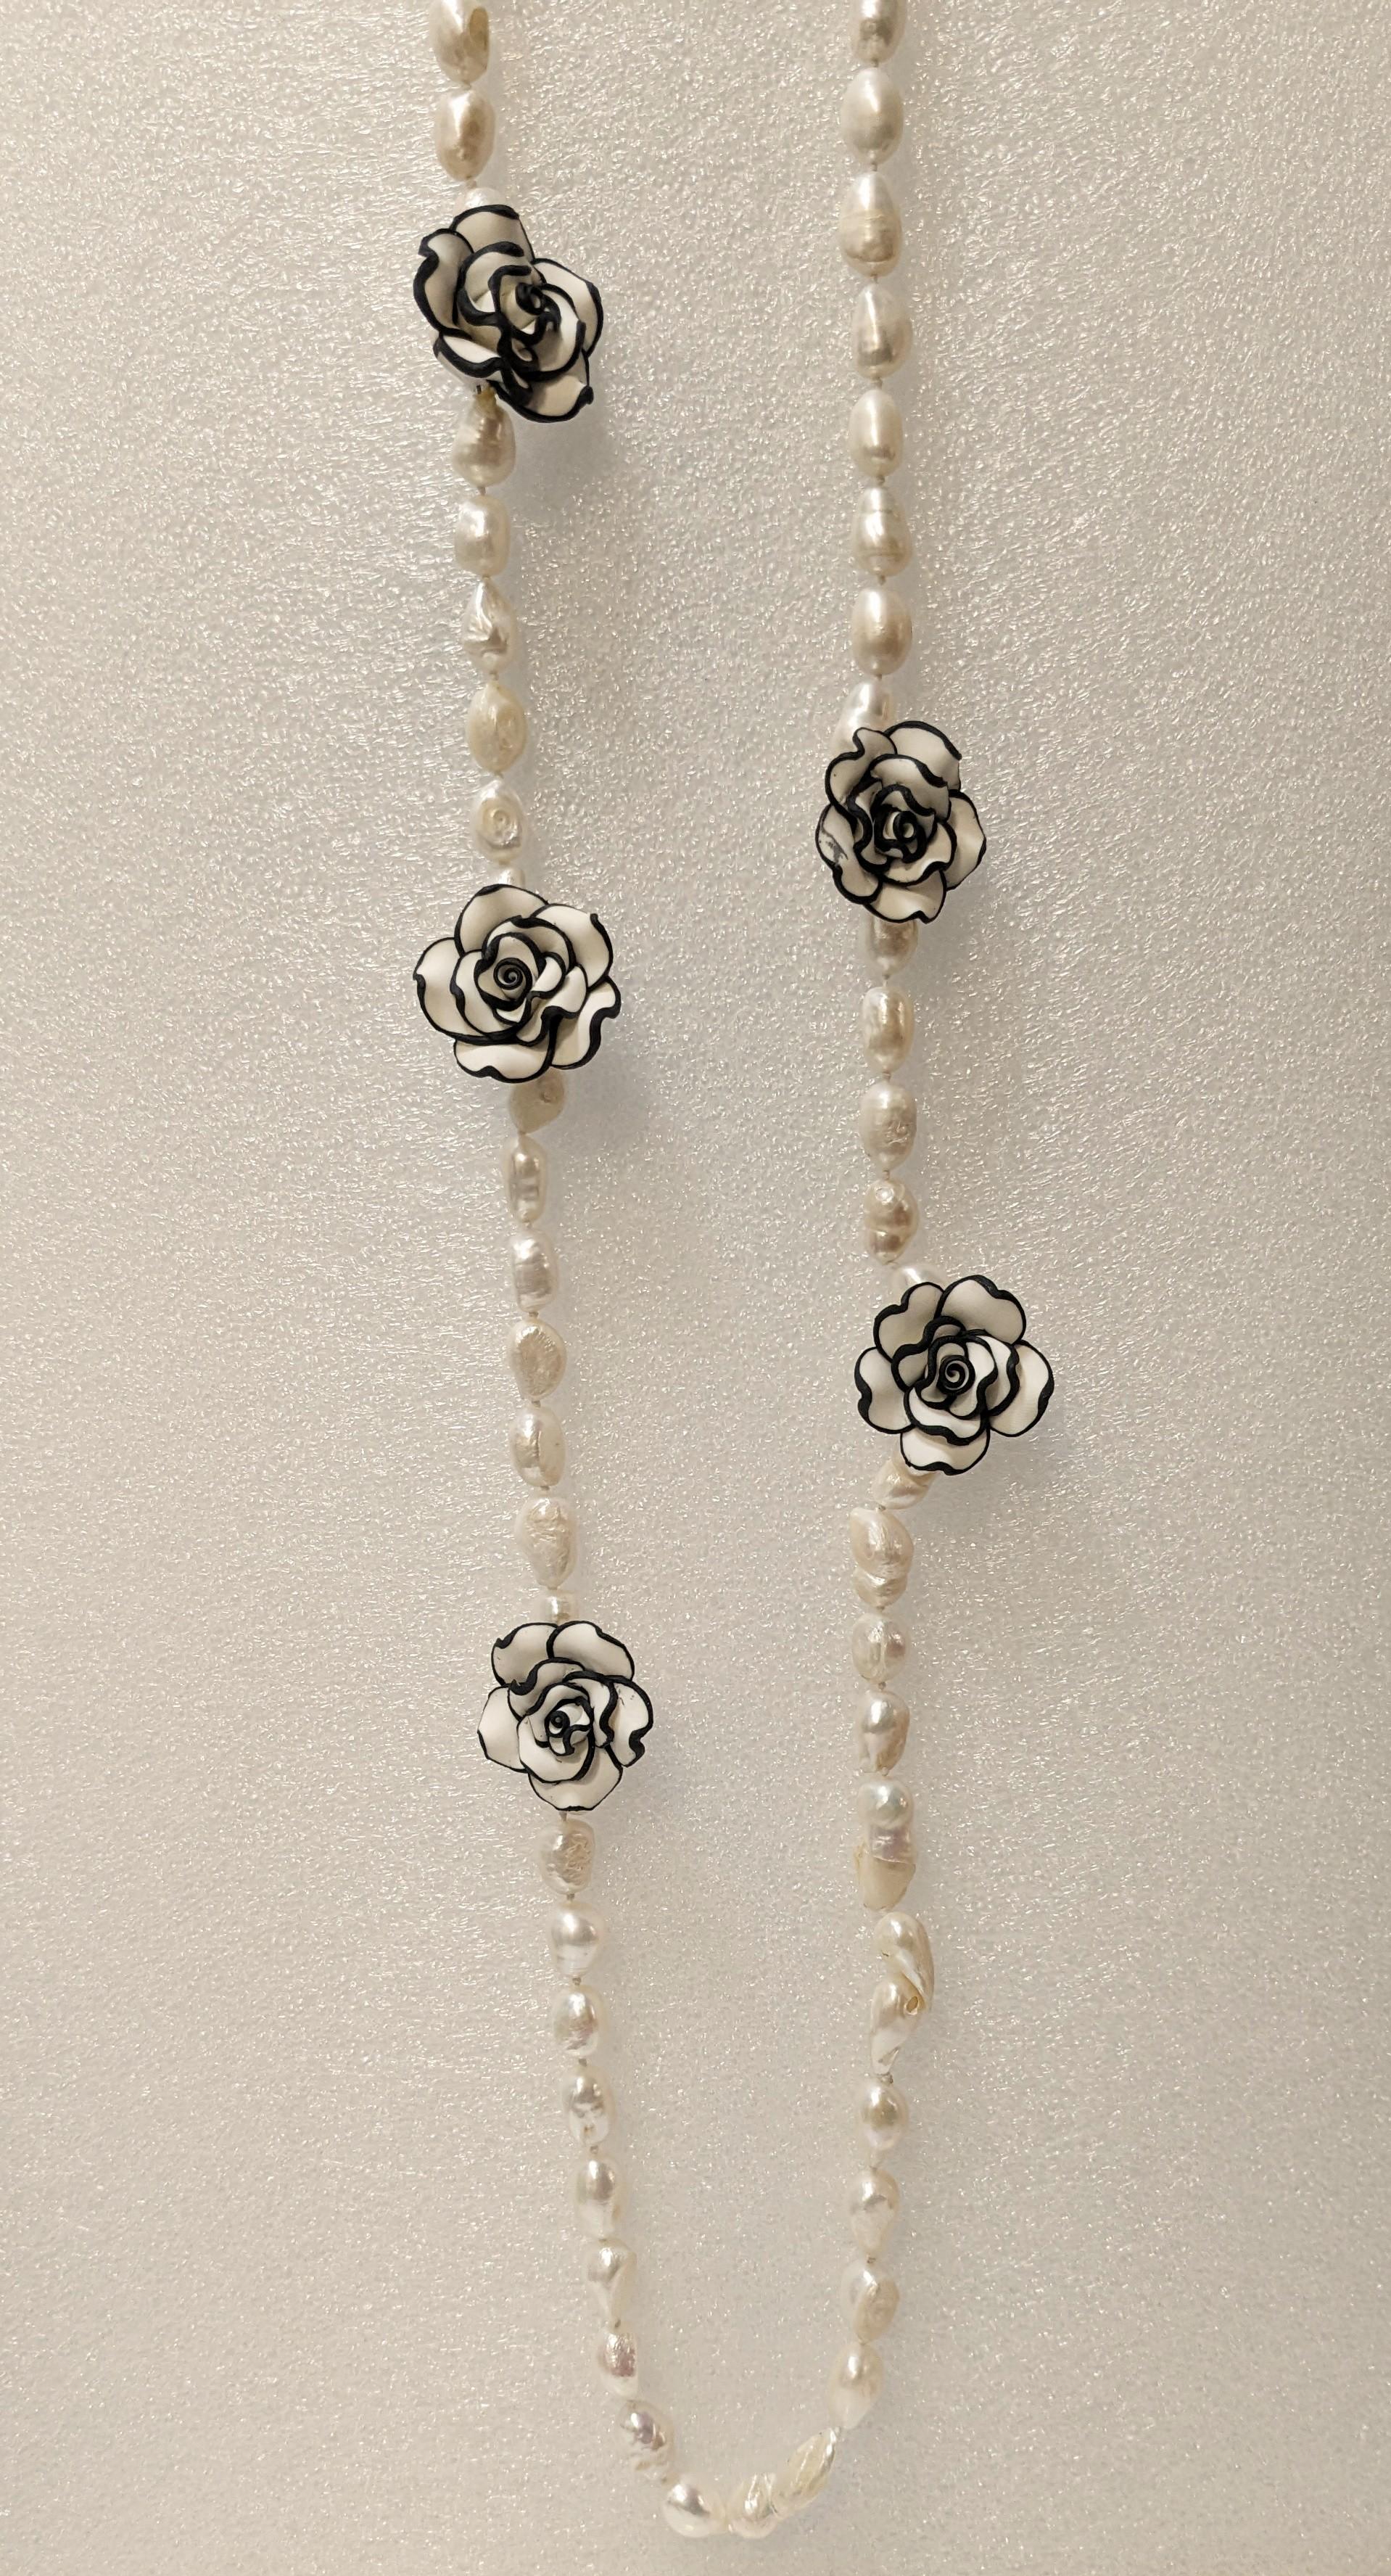  Long River Pearl Necklace with Chanel-type Resin Flowers.
All in matte gold bath.

Length  106 cm (41,73 inches)
Weight  130 GRAMS
.



Pradera Fashion Division  is specialized in European Fashion designers, clothing, handbags, accessories and as